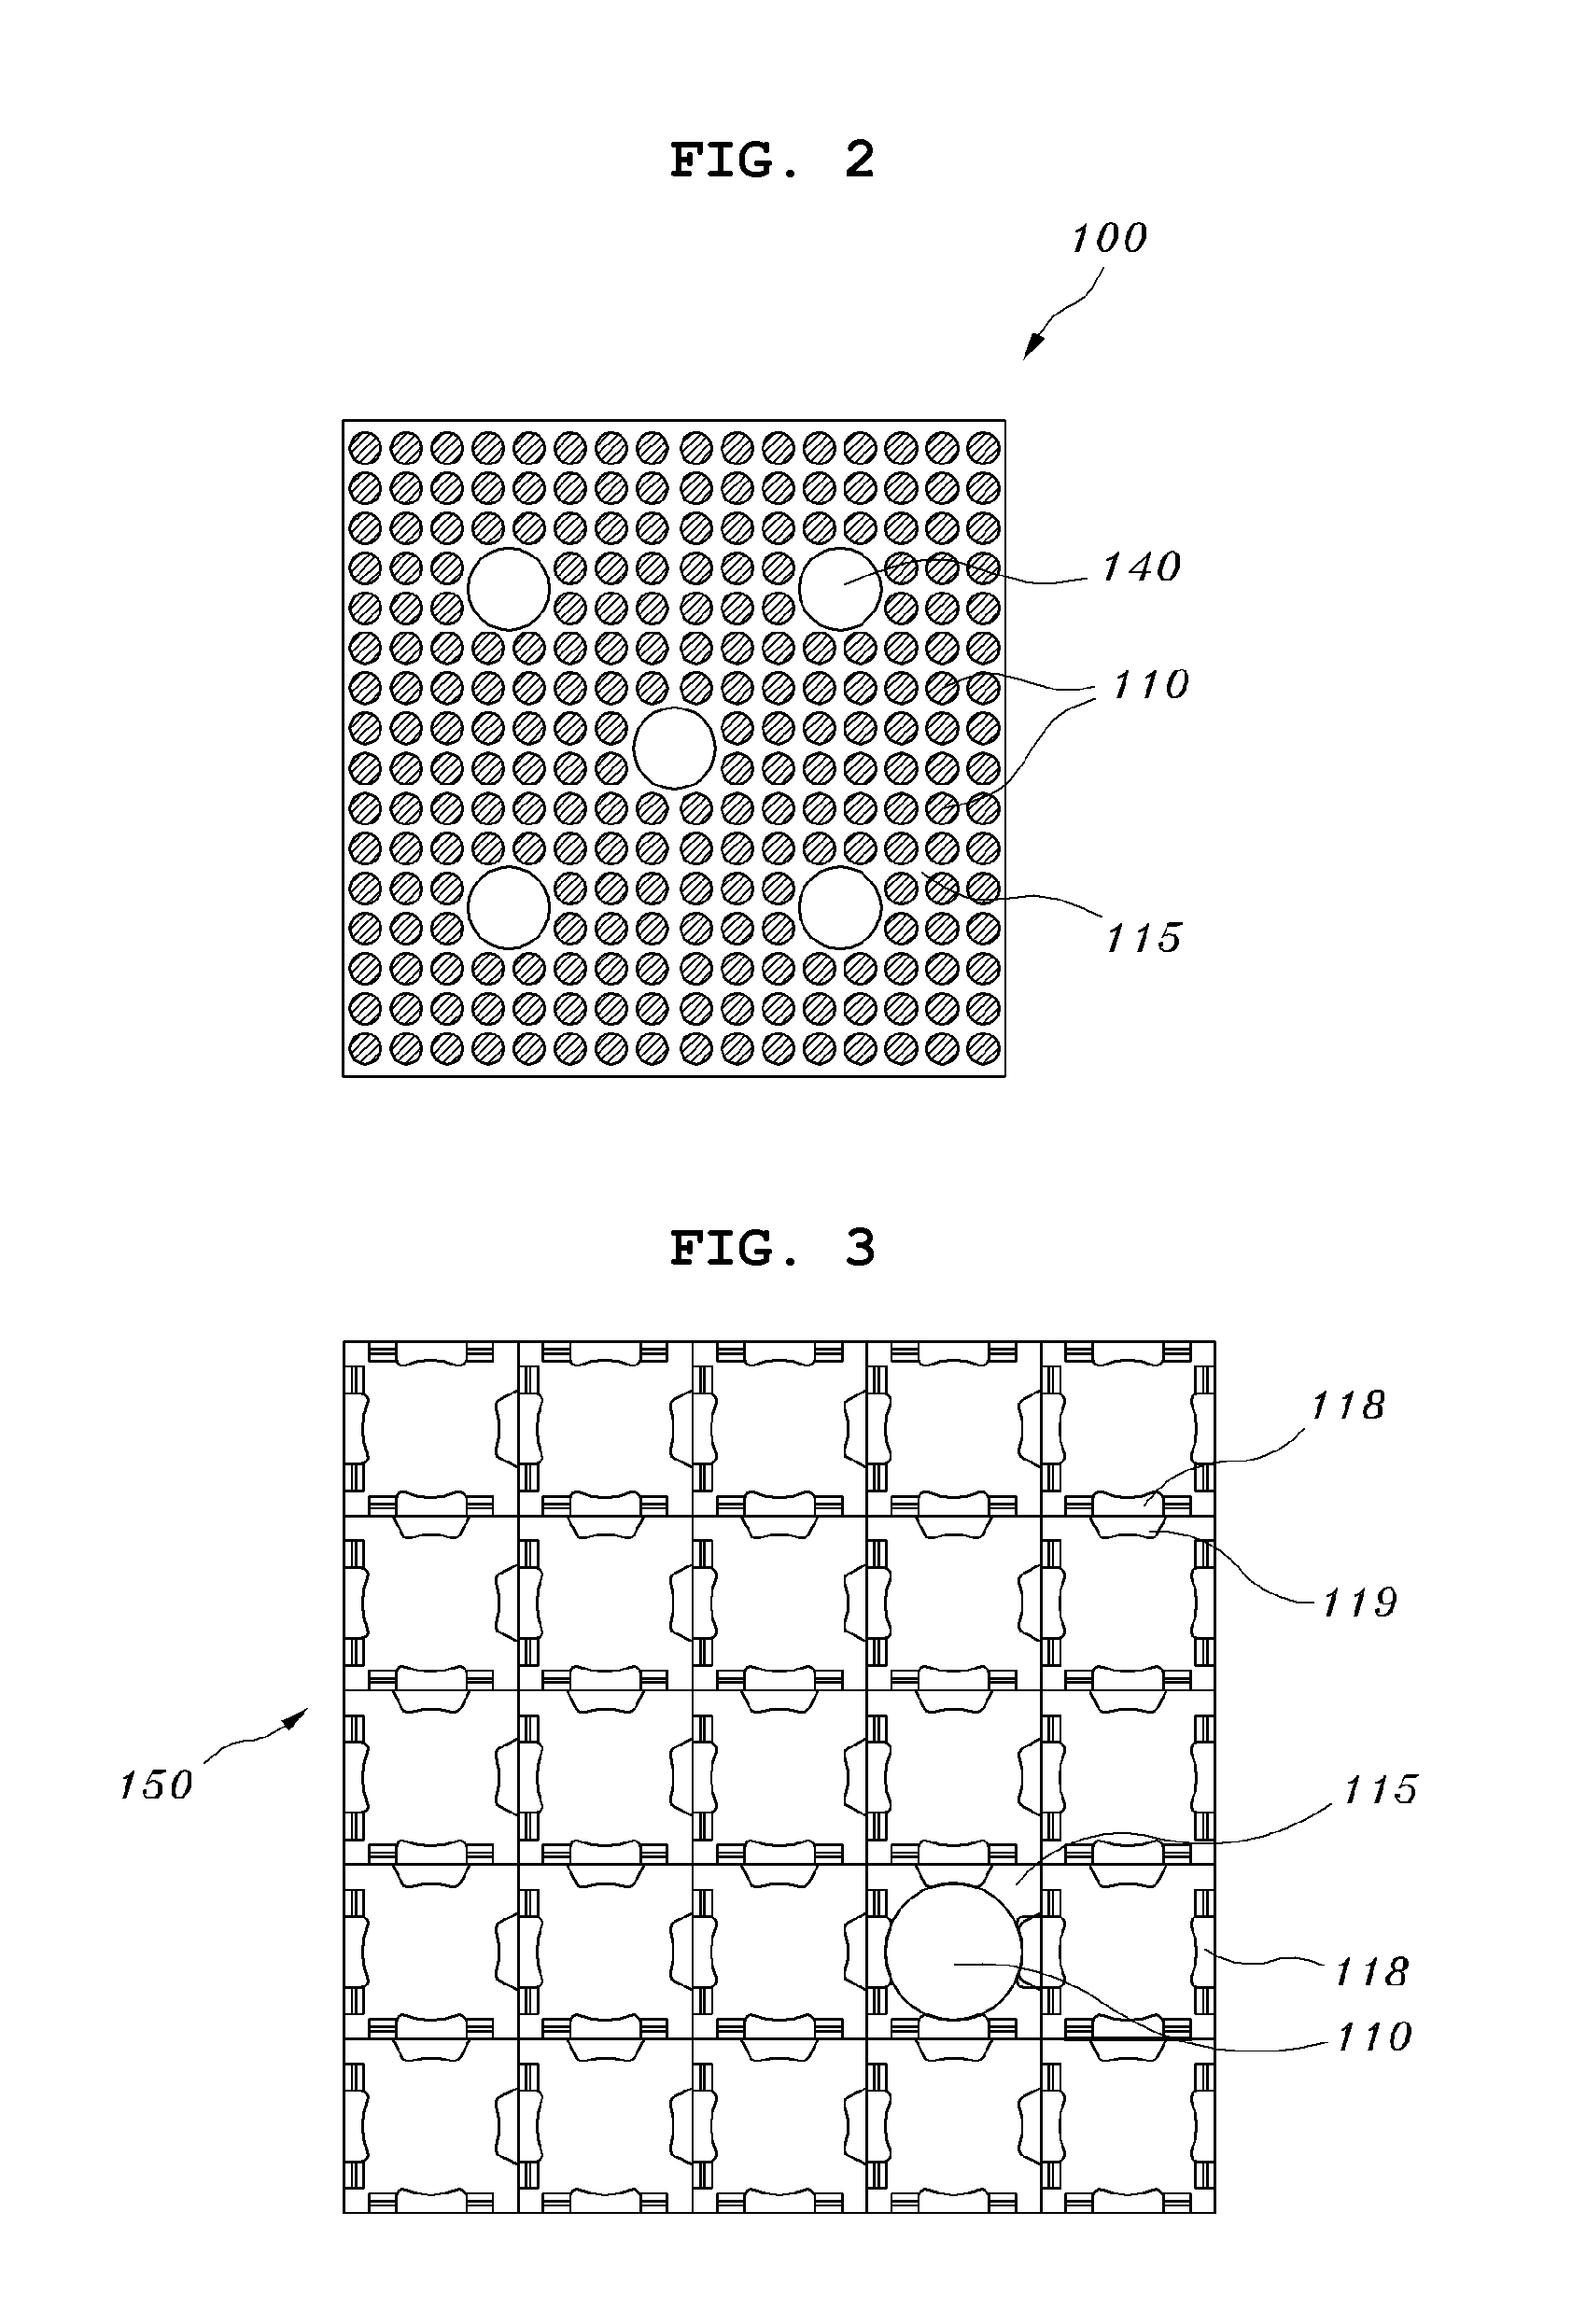 Spacer grid for dual-cooling nuclear fuel rods using intersectional support structures